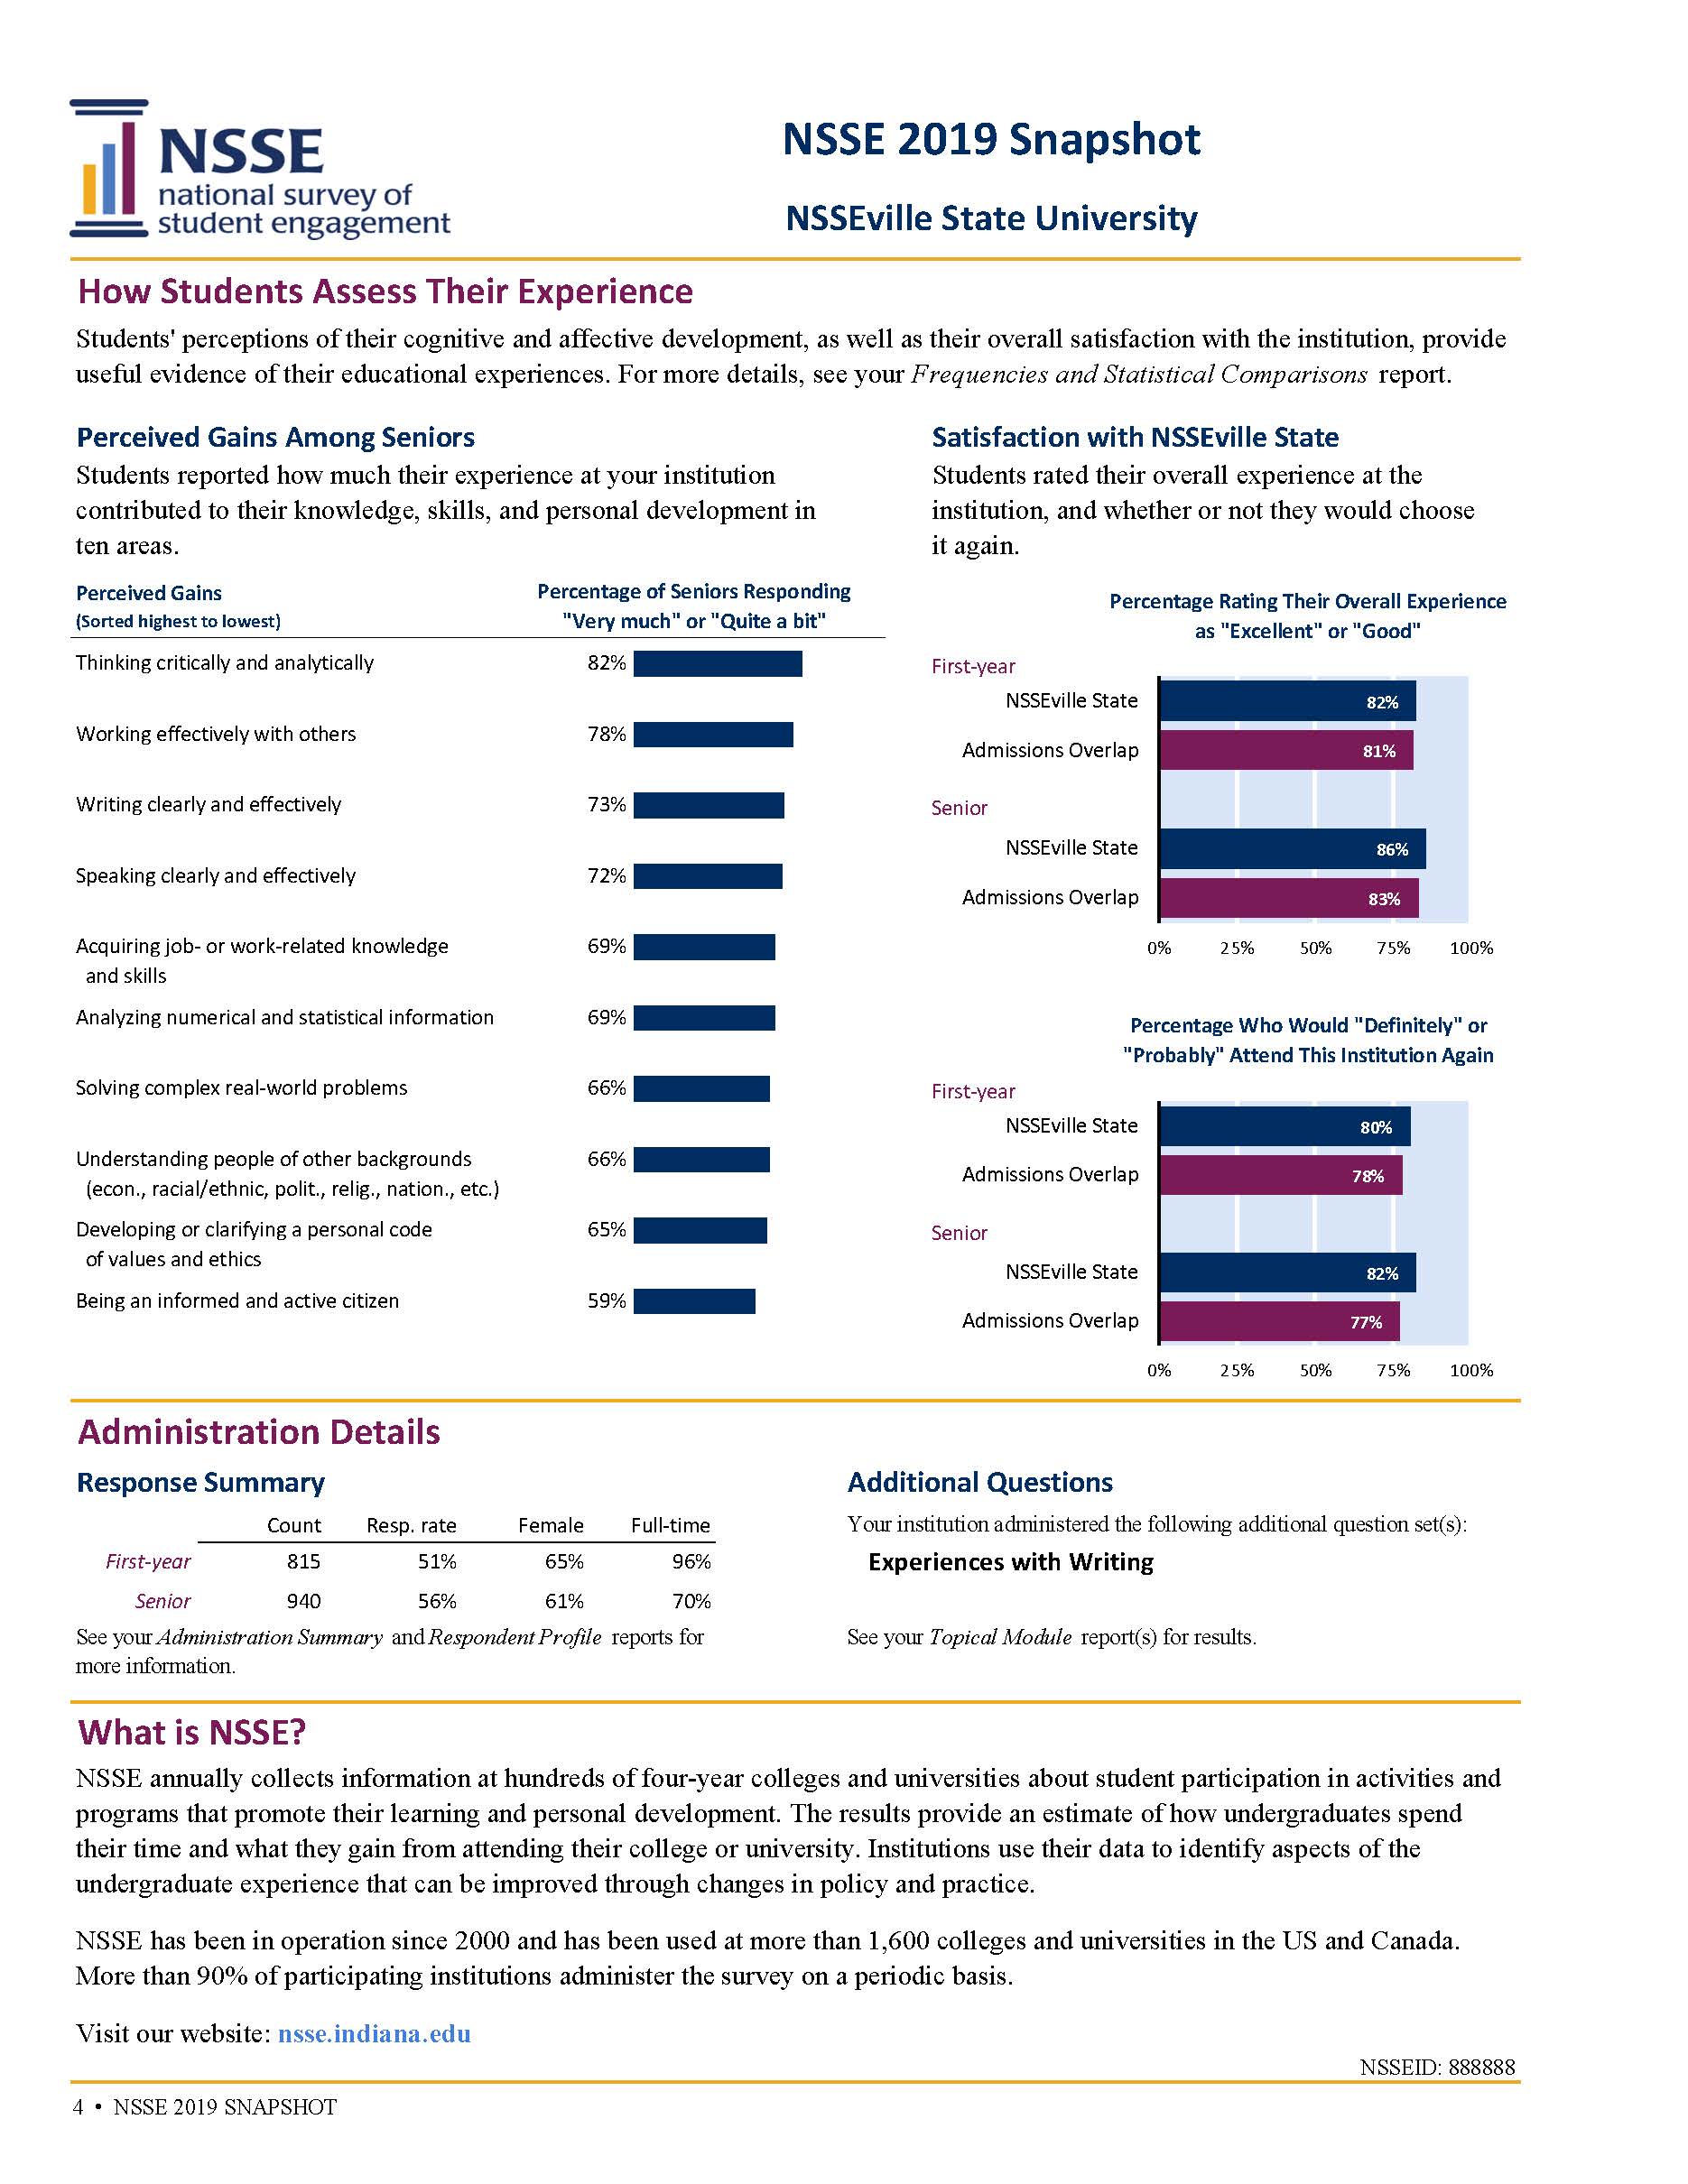 Sample Report: page 4 of NSSE Snapshot